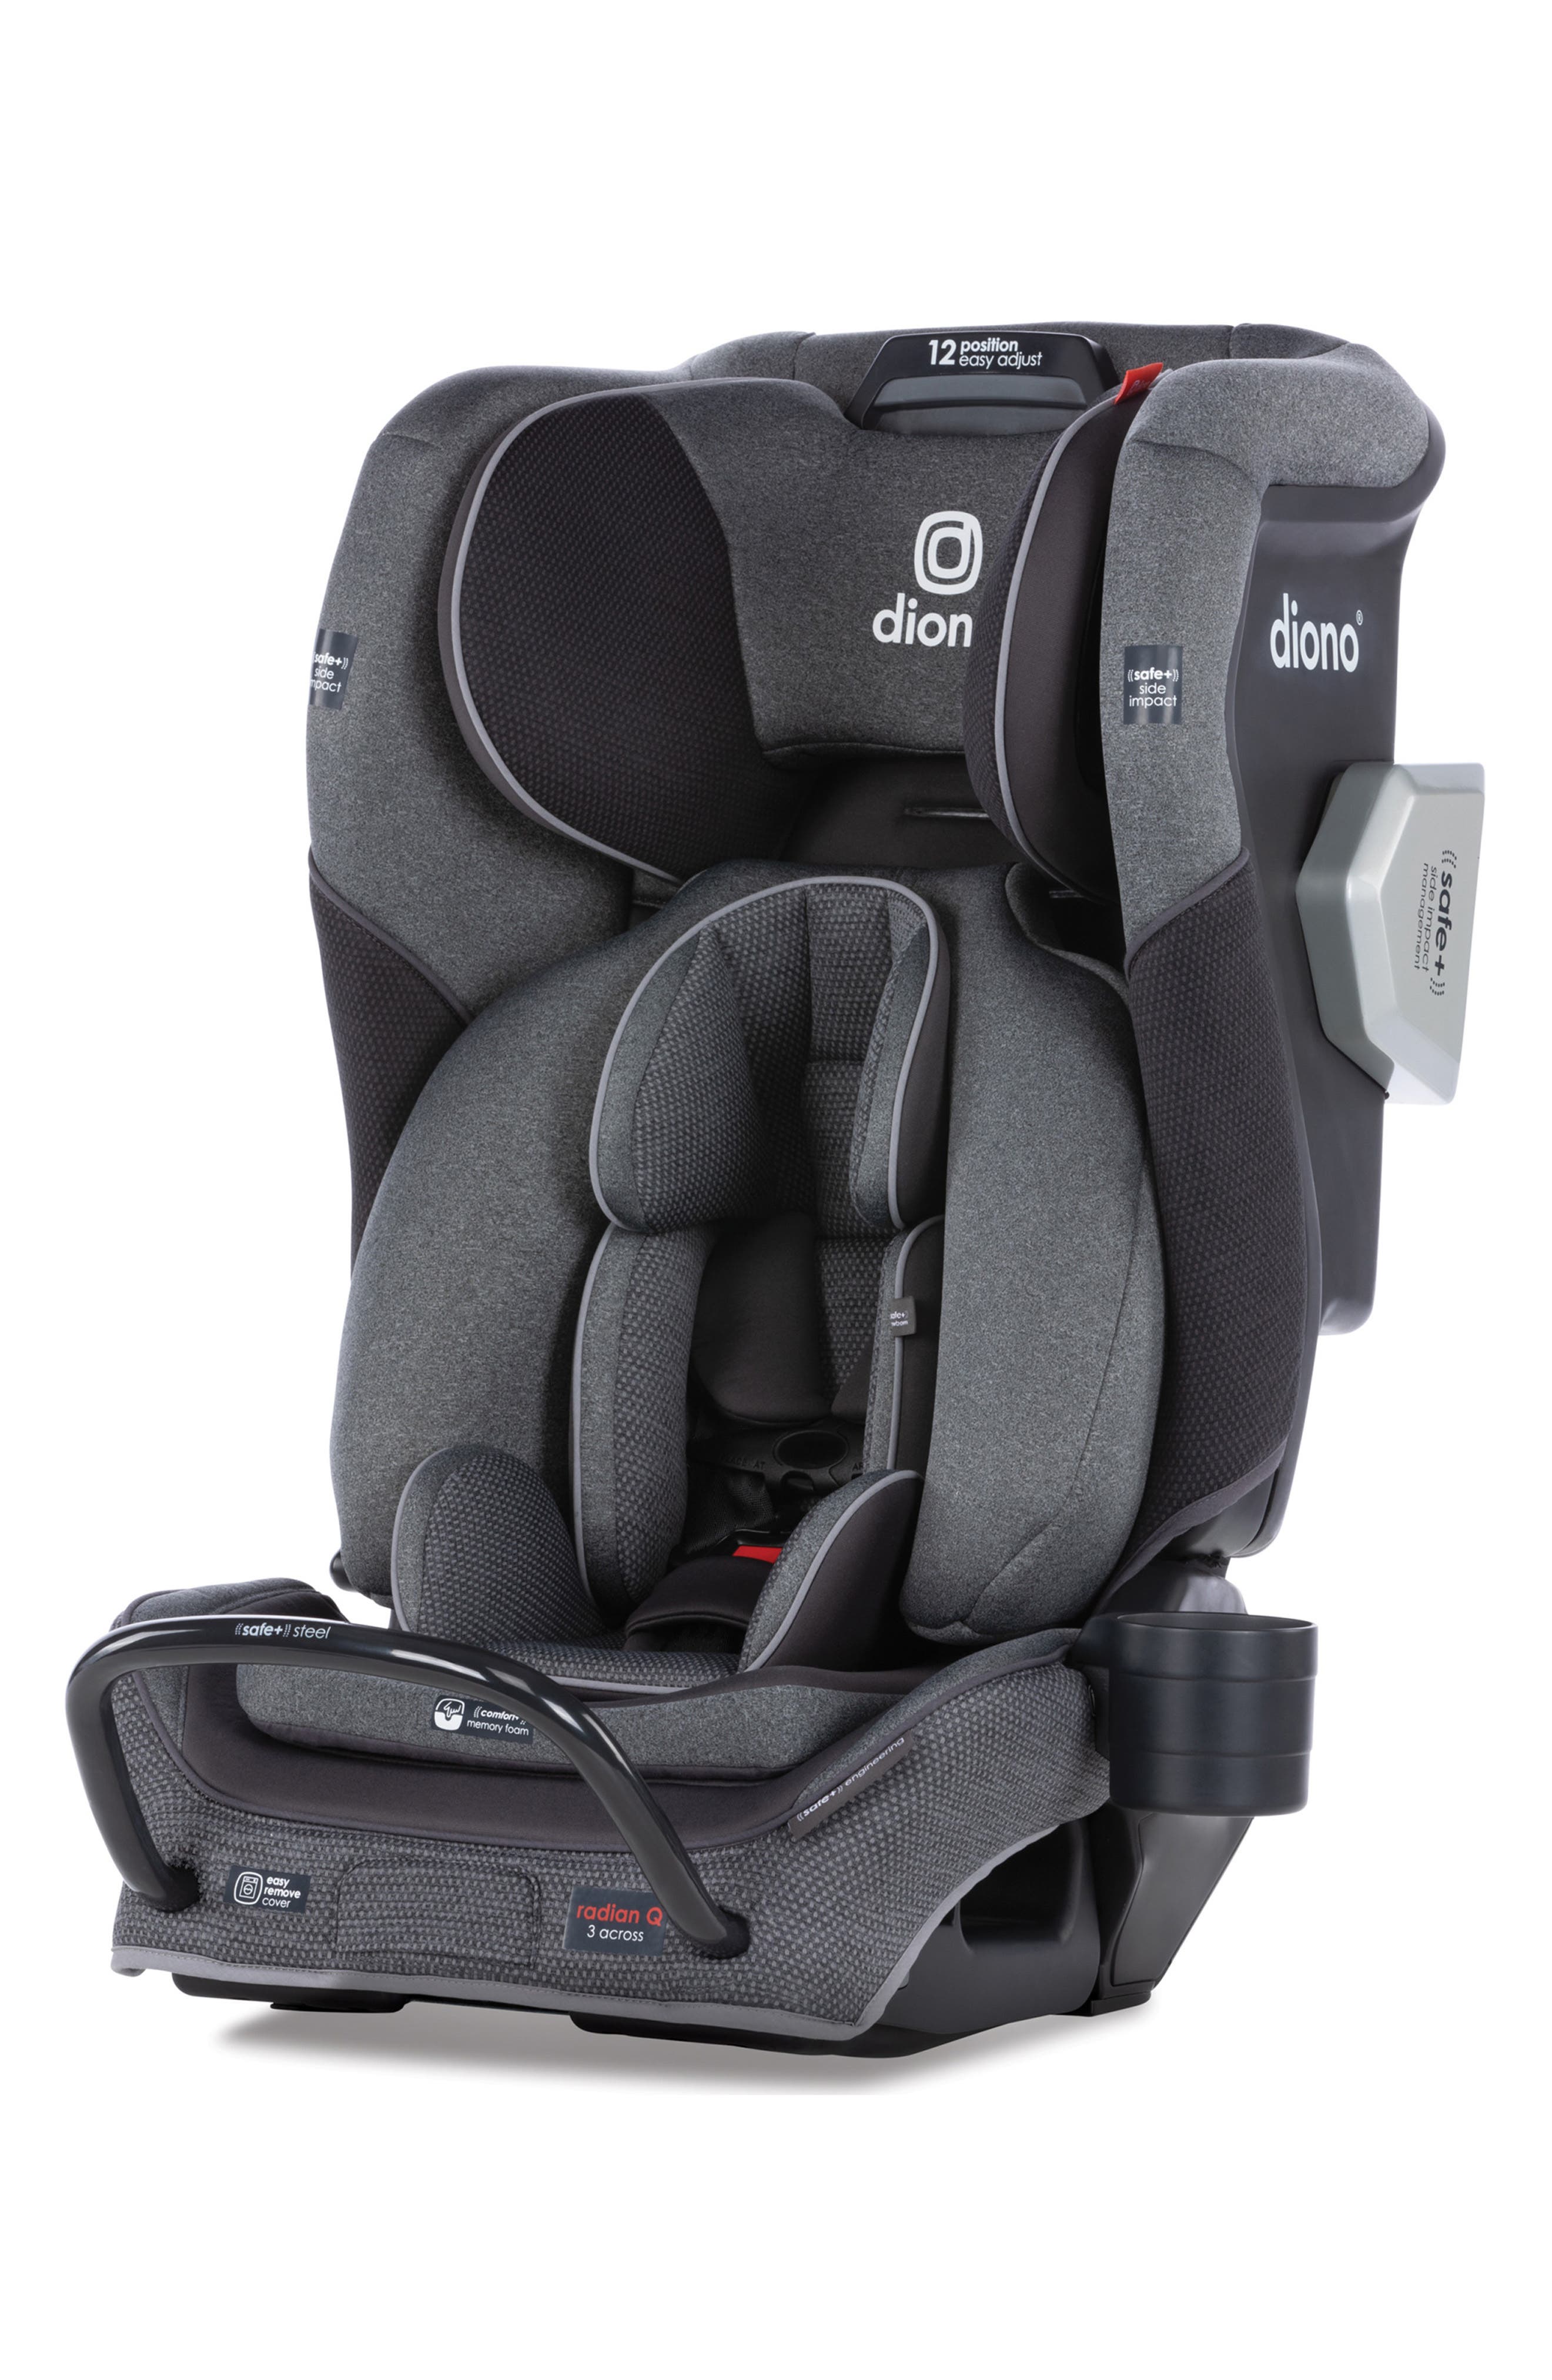 Diono radian(R) 3QXT All-in-One Convertible Car Seat in Gray Slate